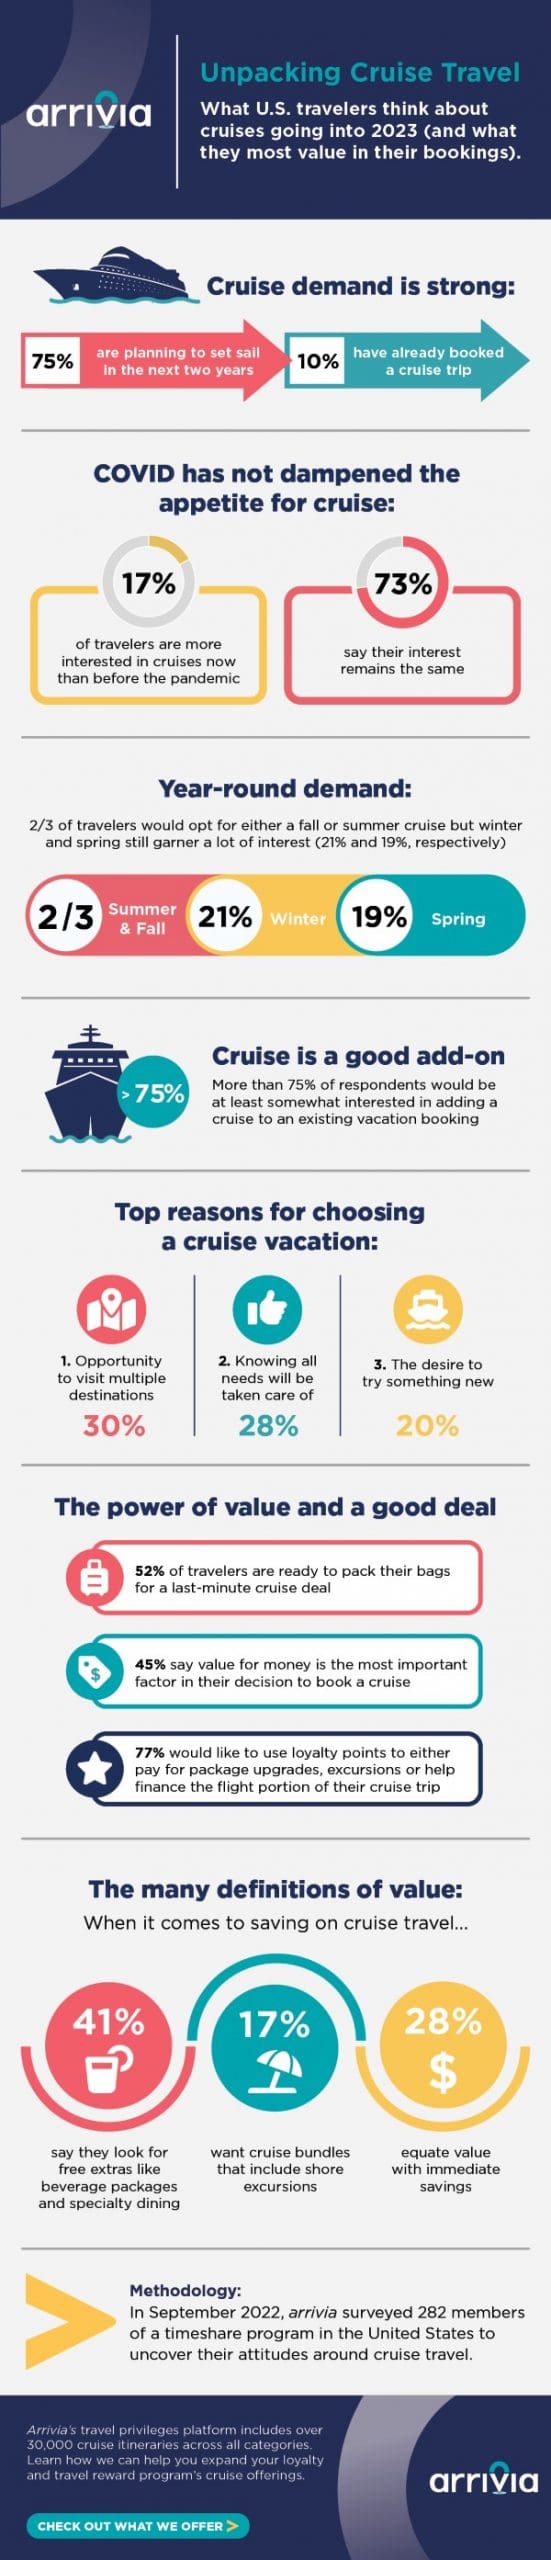 Infographic showing data from recent arrivia cruise travel survey conducted in Q3 2022